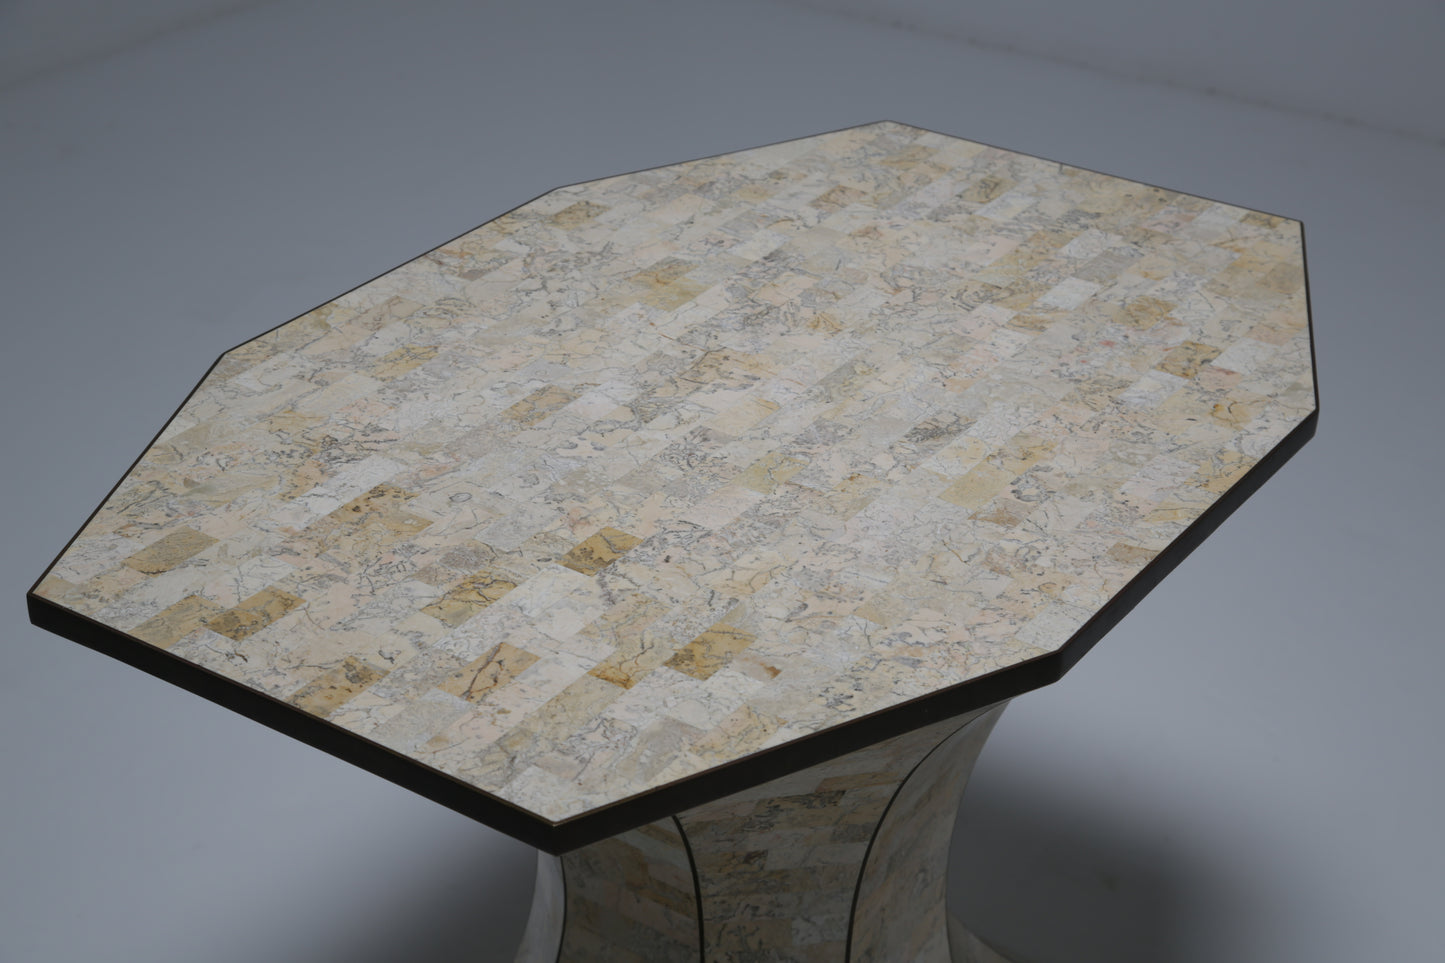 Maitland Smith stone console table or Centre table.